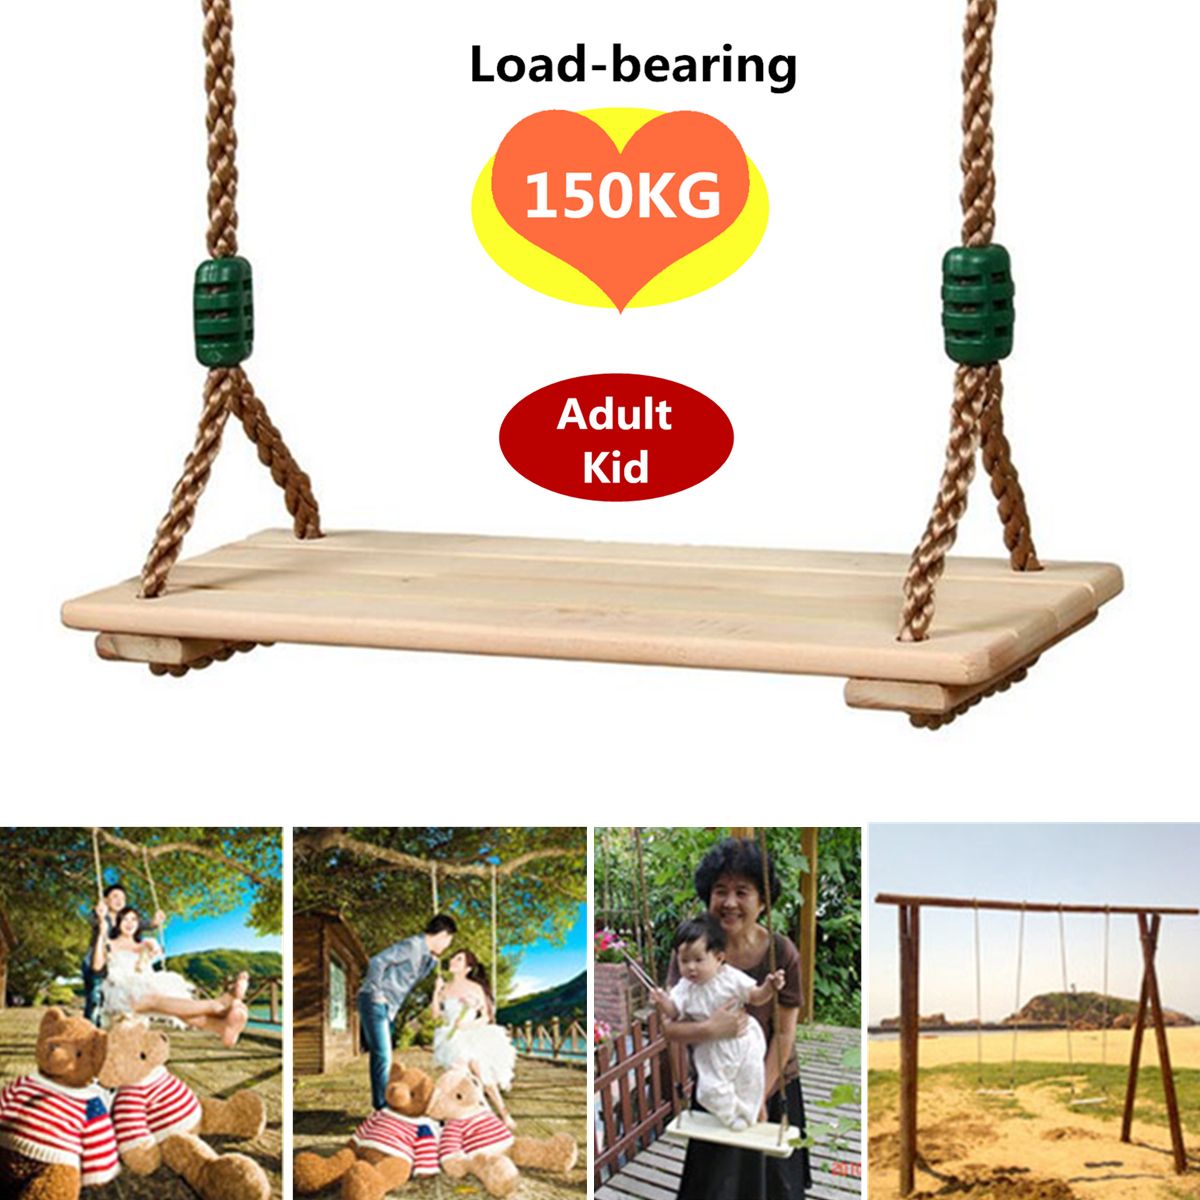 Wooden-Swings-Seat-Child-Adult-Garden-Outdoor-Yard-Tree-Swing-Play-Birthday-Gift-Decorations-1443735